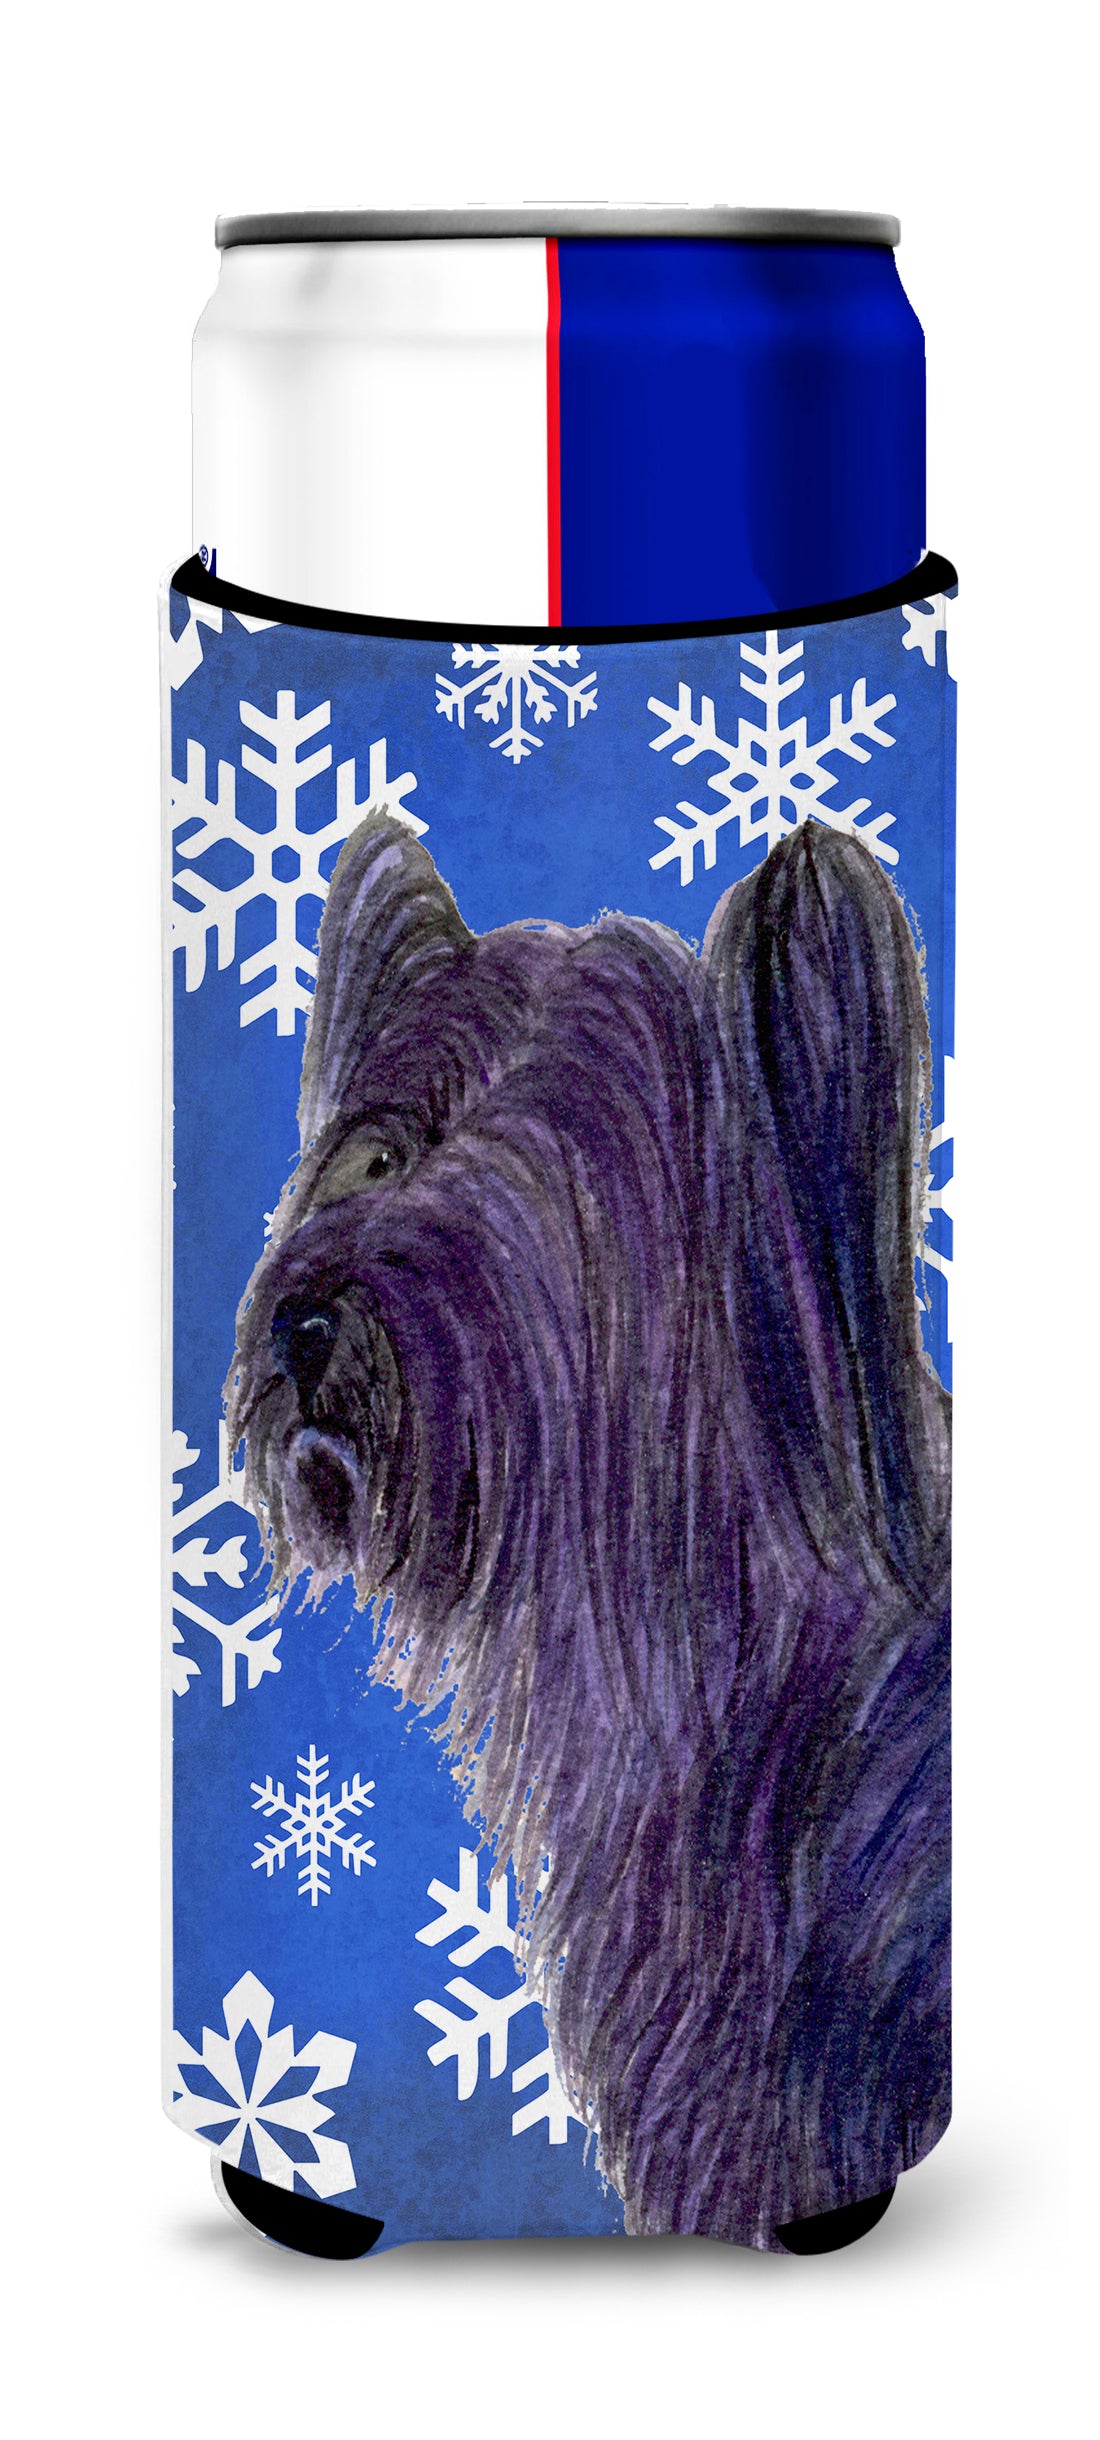 Skye Terrier Winter Snowflakes Holiday Ultra Beverage Insulators for slim cans SS4601MUK.